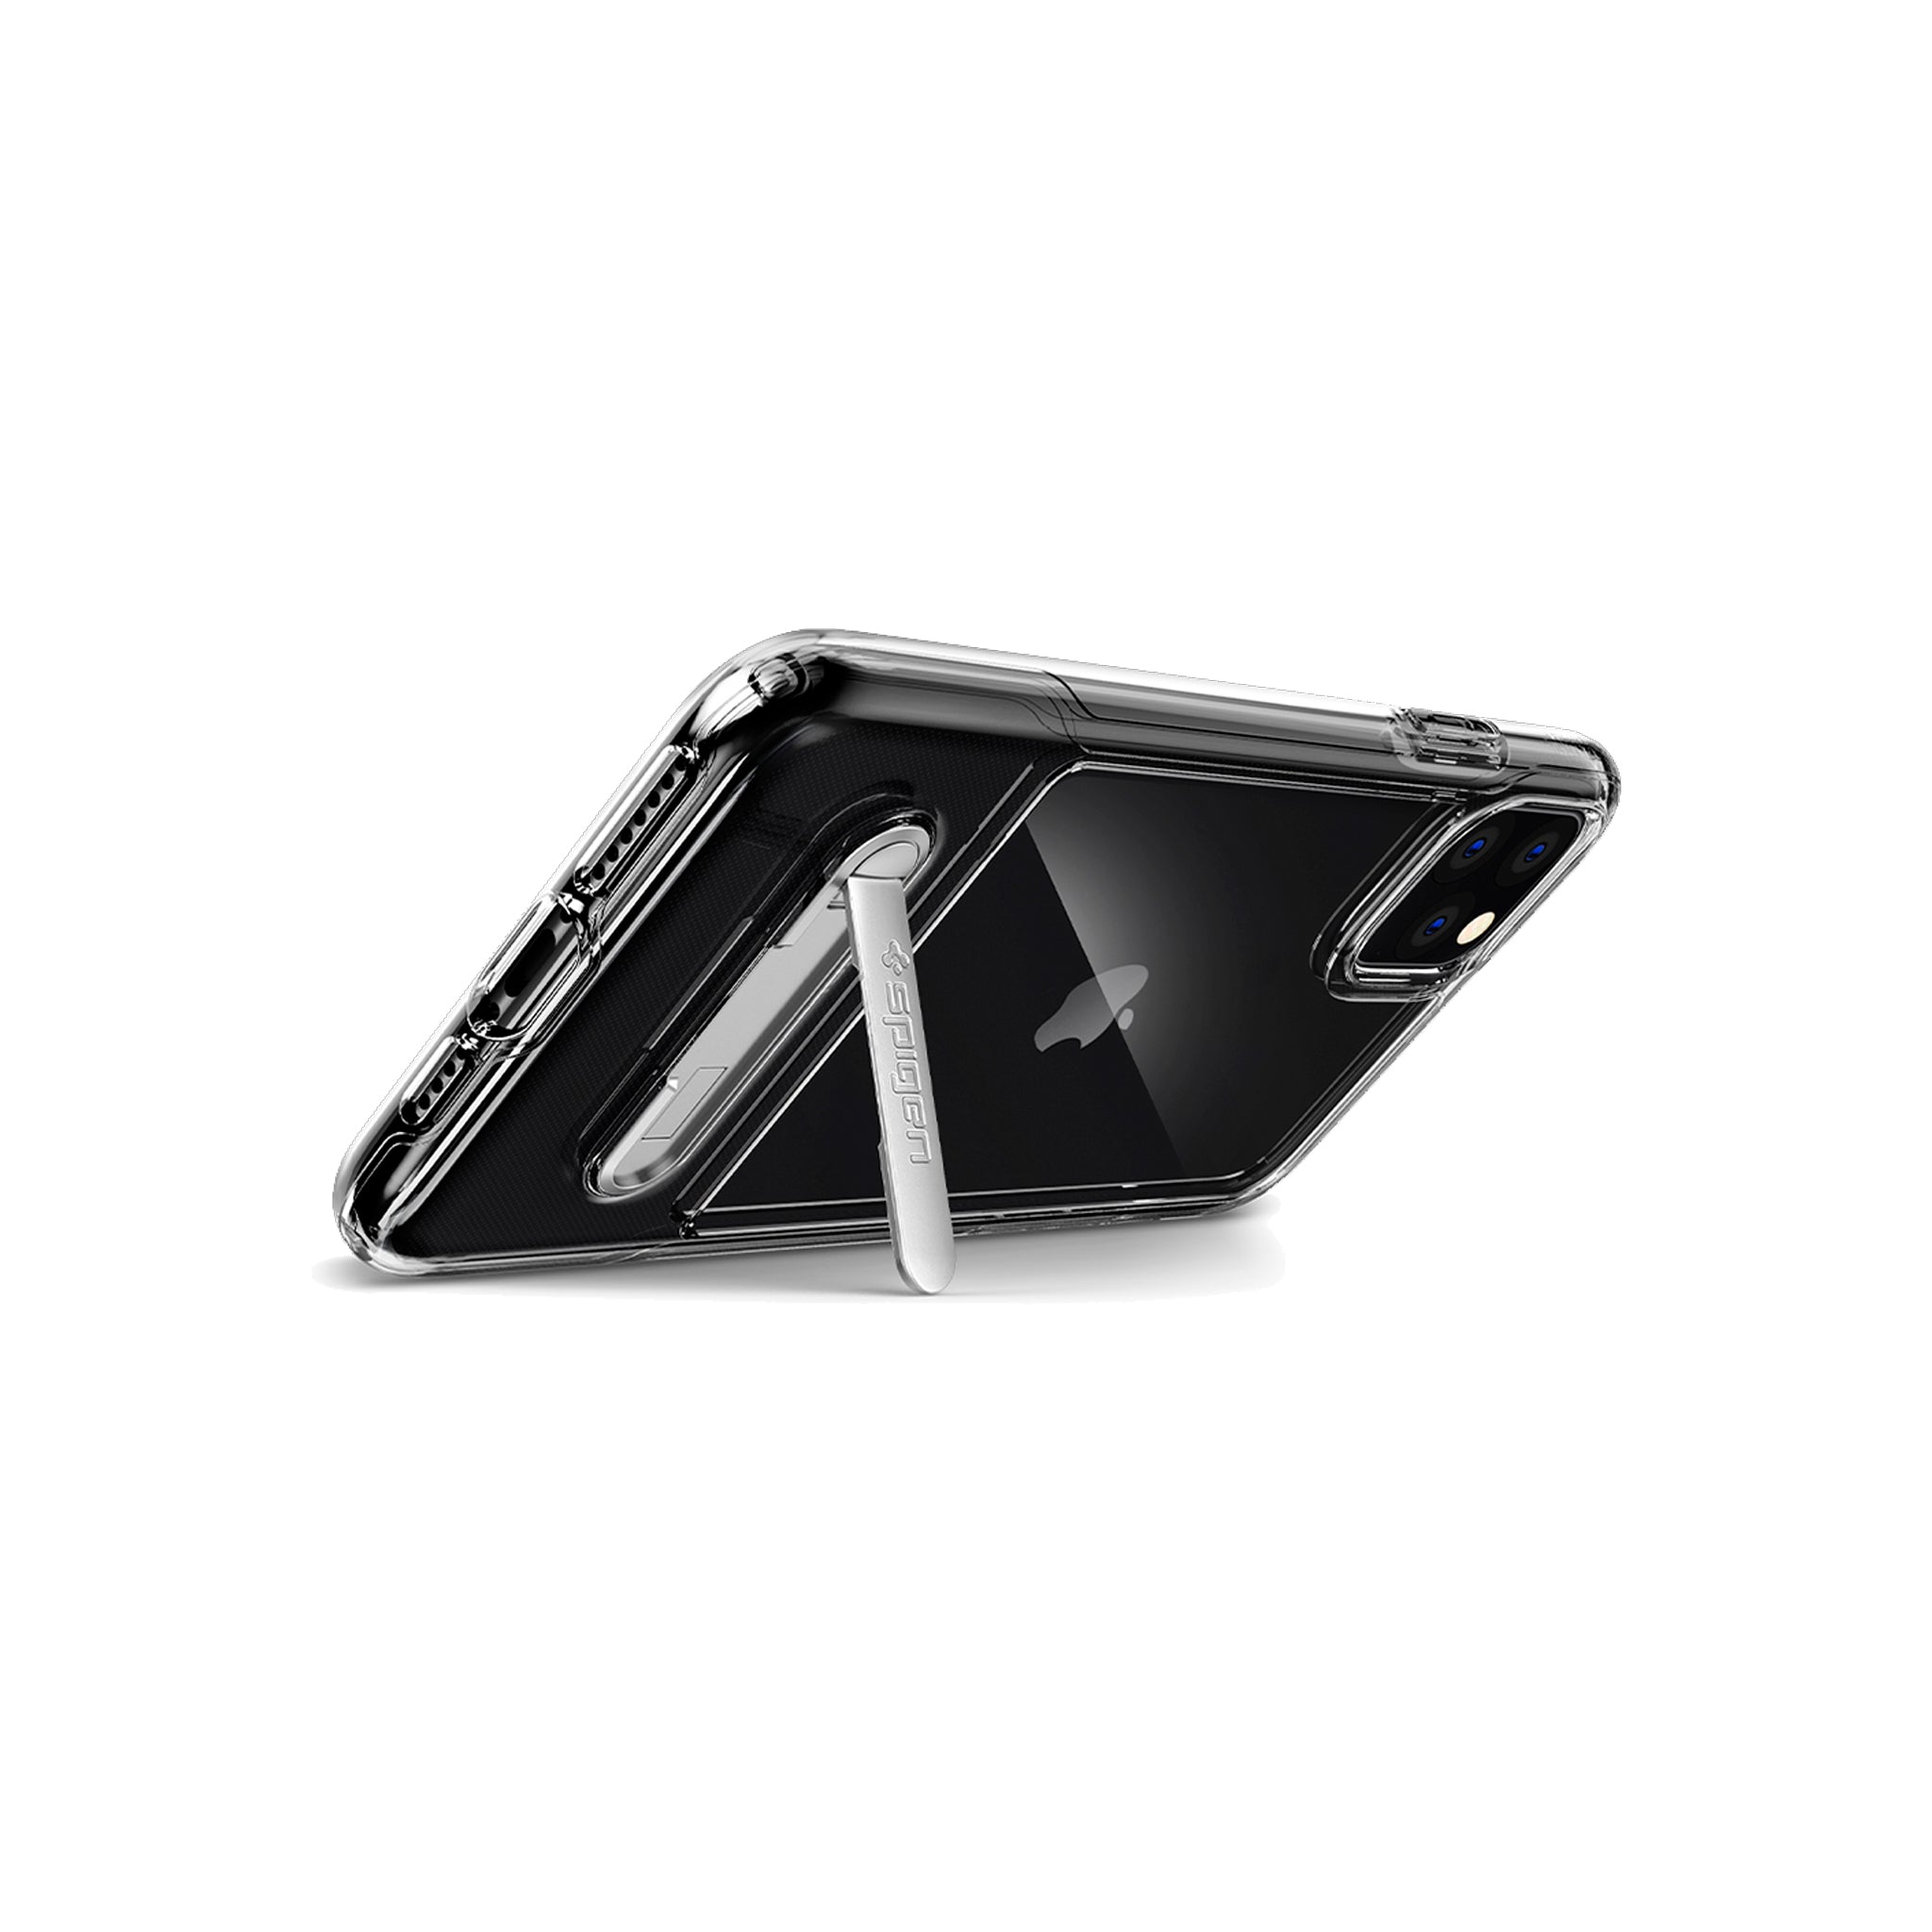 Spigen - Slim Armor Essential S Case For Apple Iphone 11 Pro Max - Crystal Clear